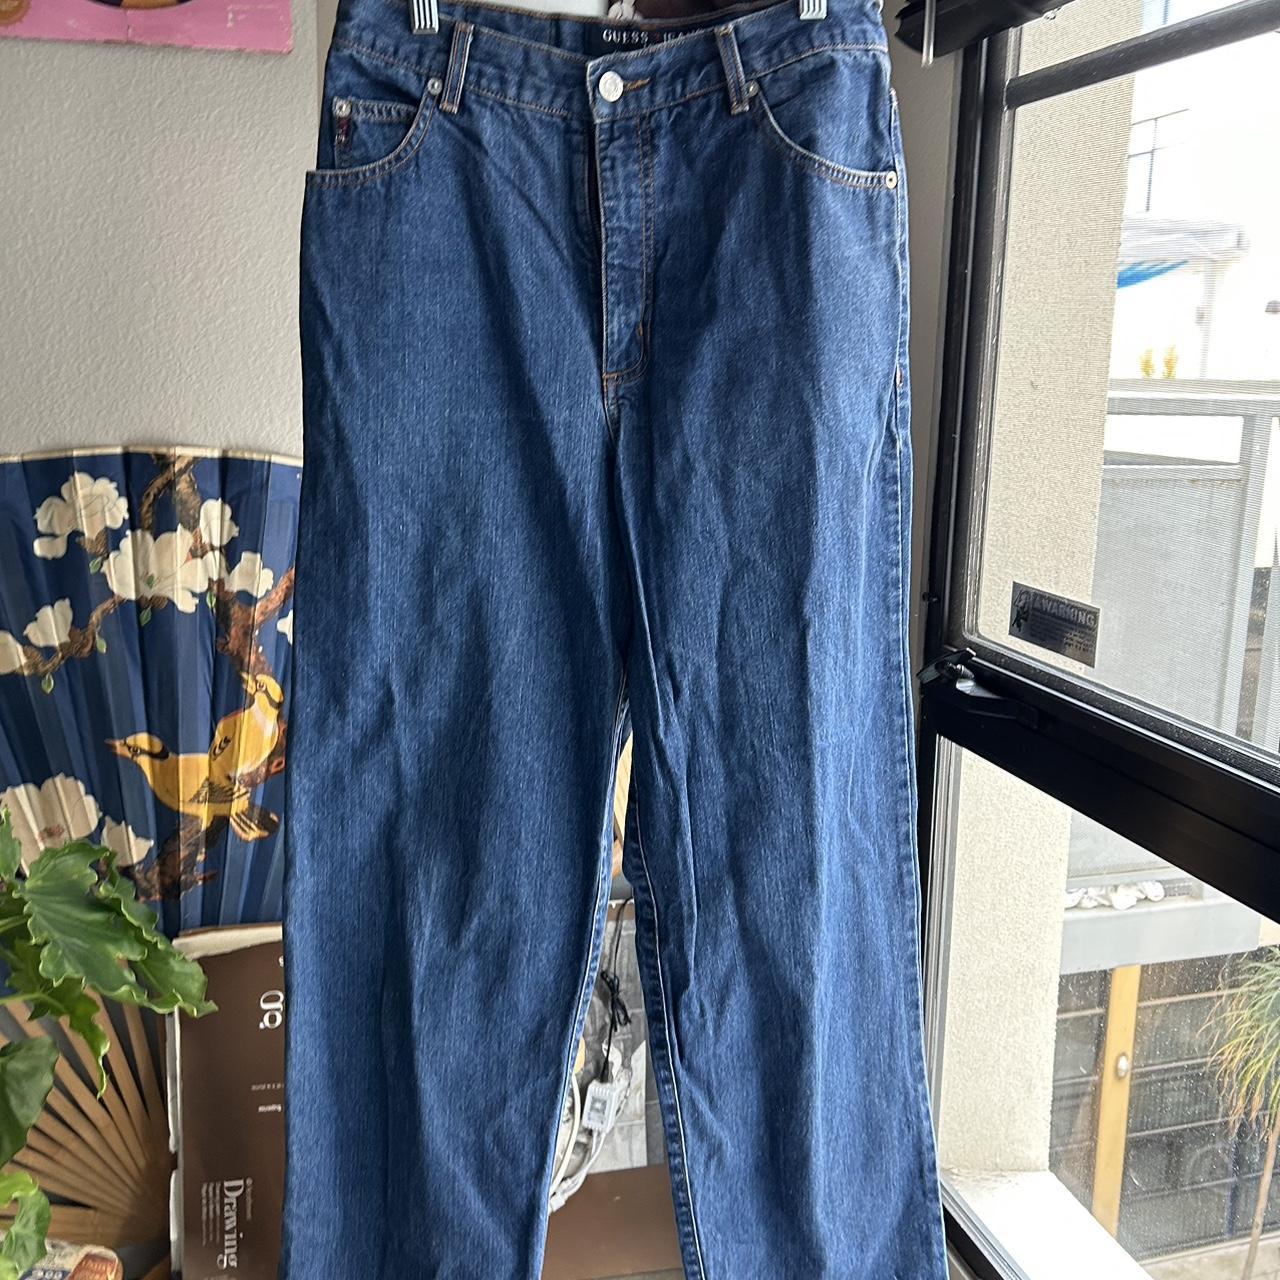 Kids baggy Guess jeans size 16 - fits great for a... - Depop